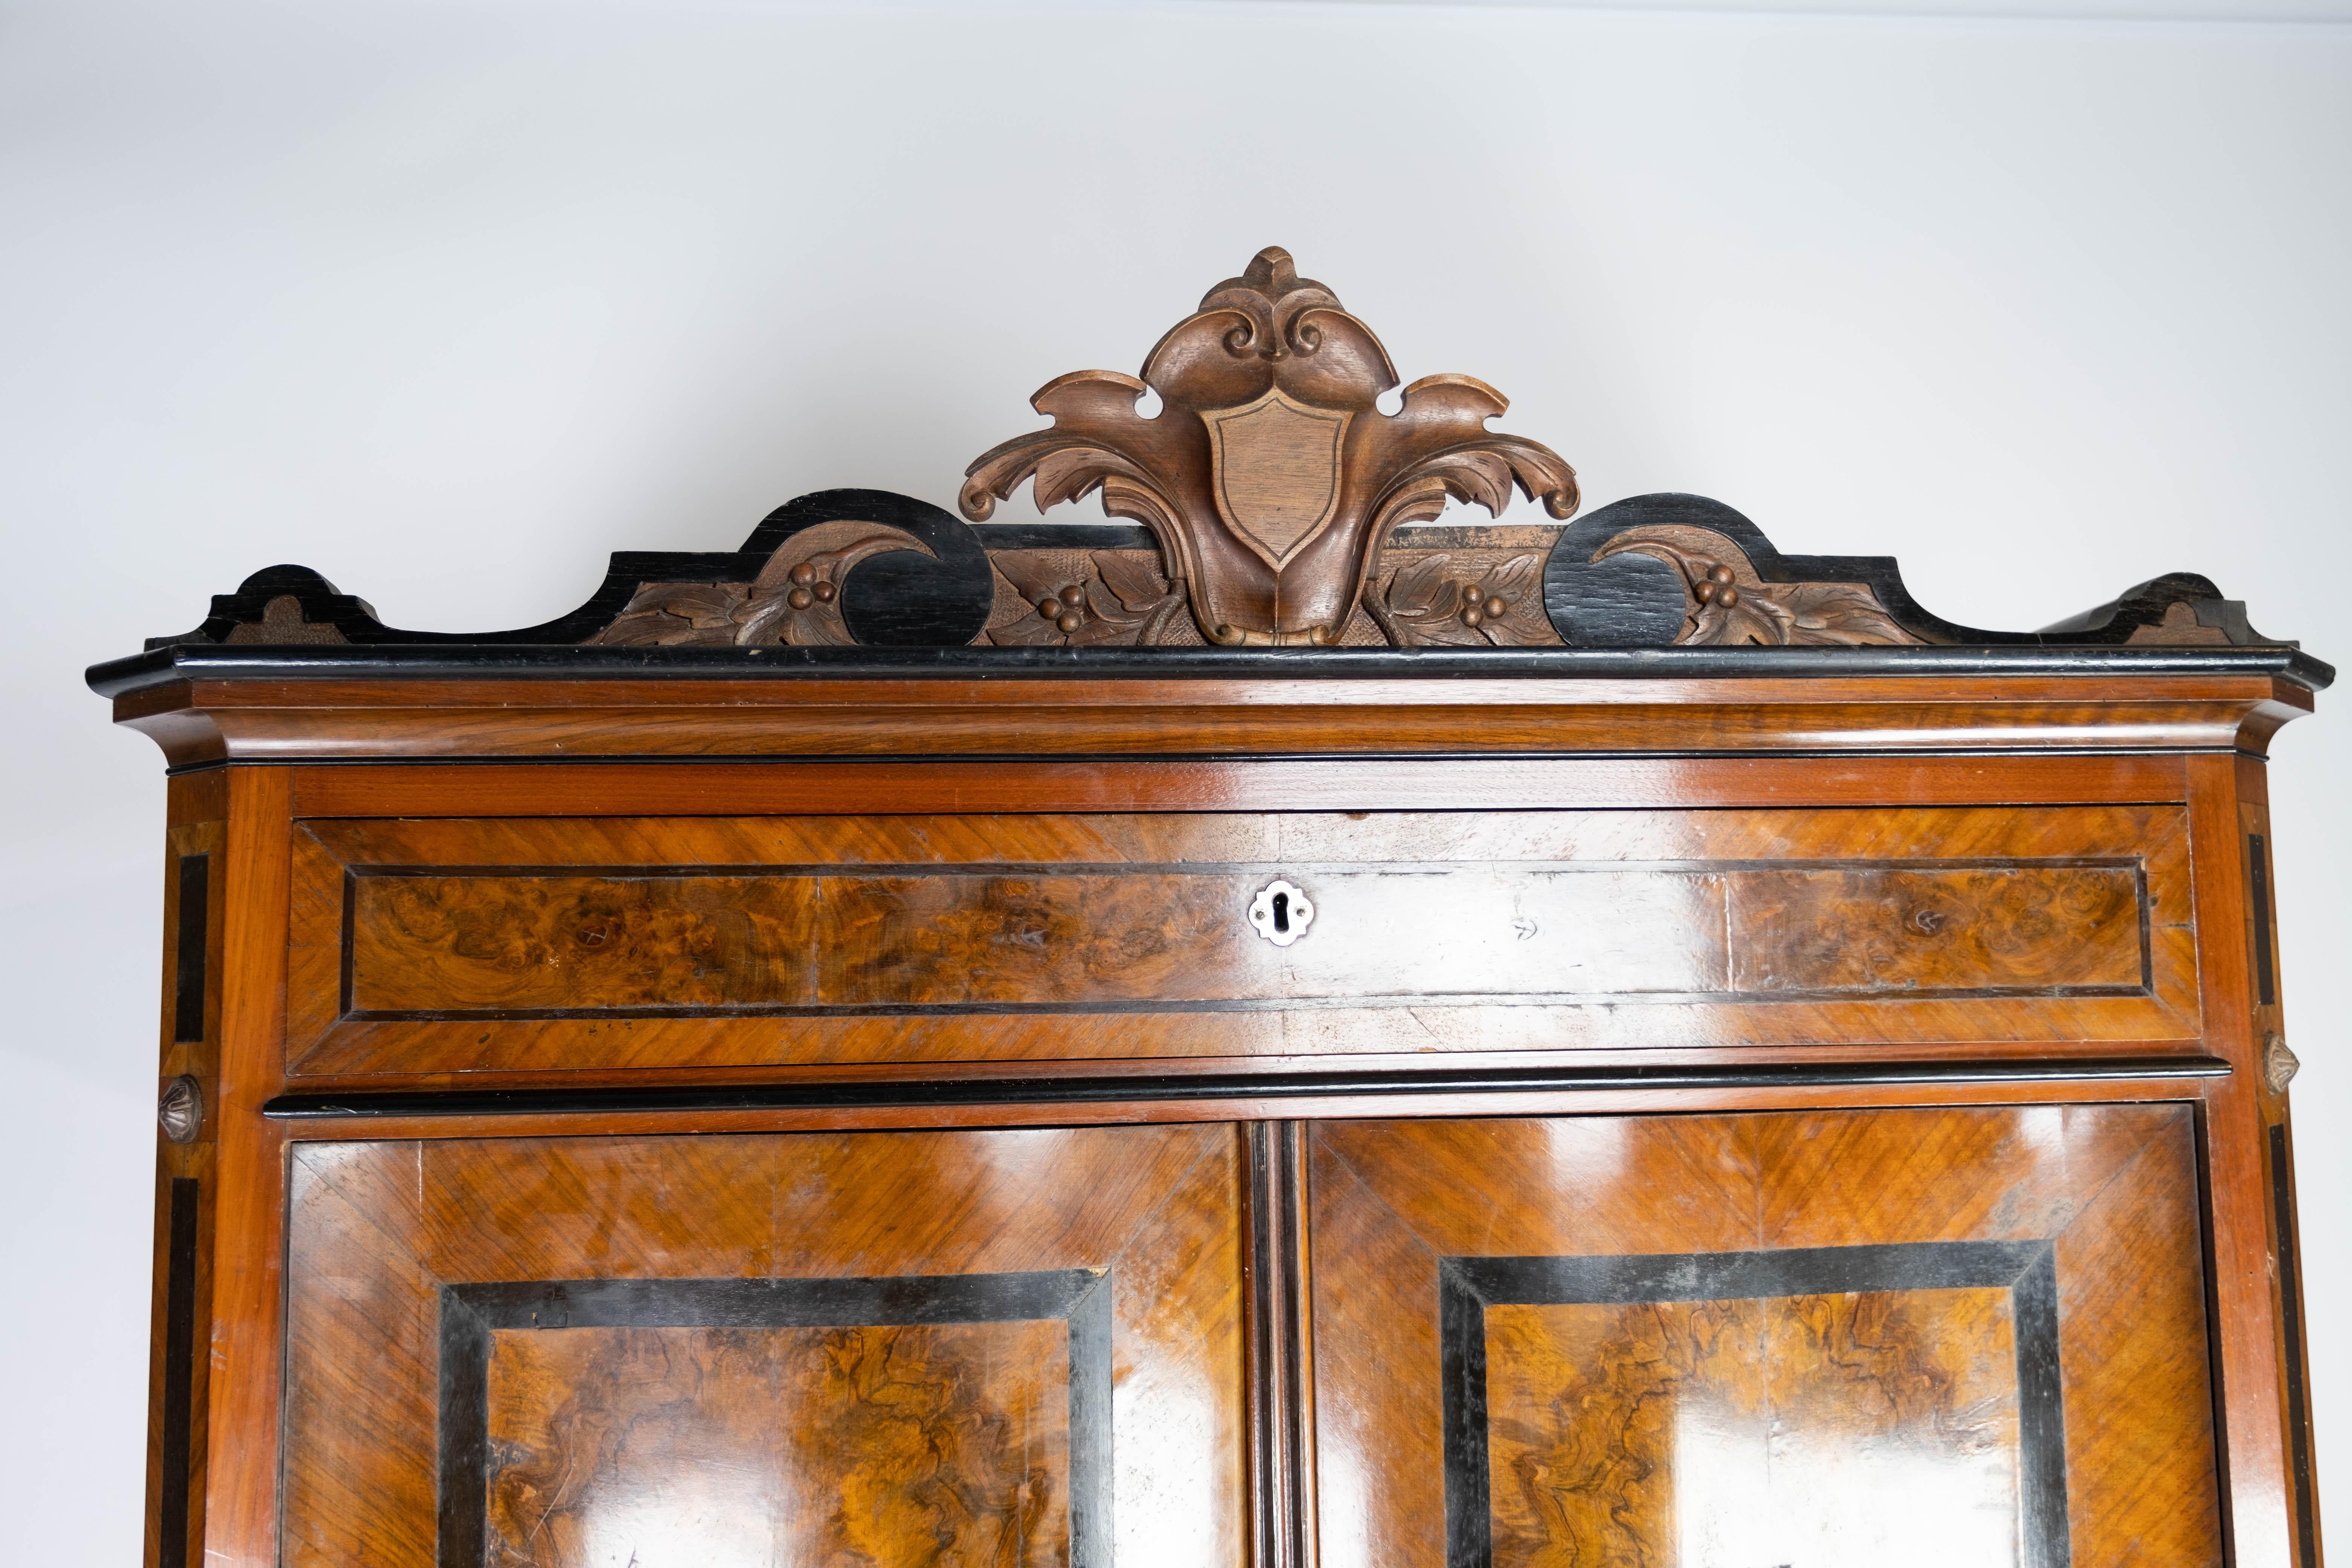 This secretary from the 1880s is a masterpiece of craftsmanship and elegance. Crafted from polished mahogany and walnut, it exudes timeless beauty and sophistication. The secretary's impressive wooden structure and fine details, such as the carvings